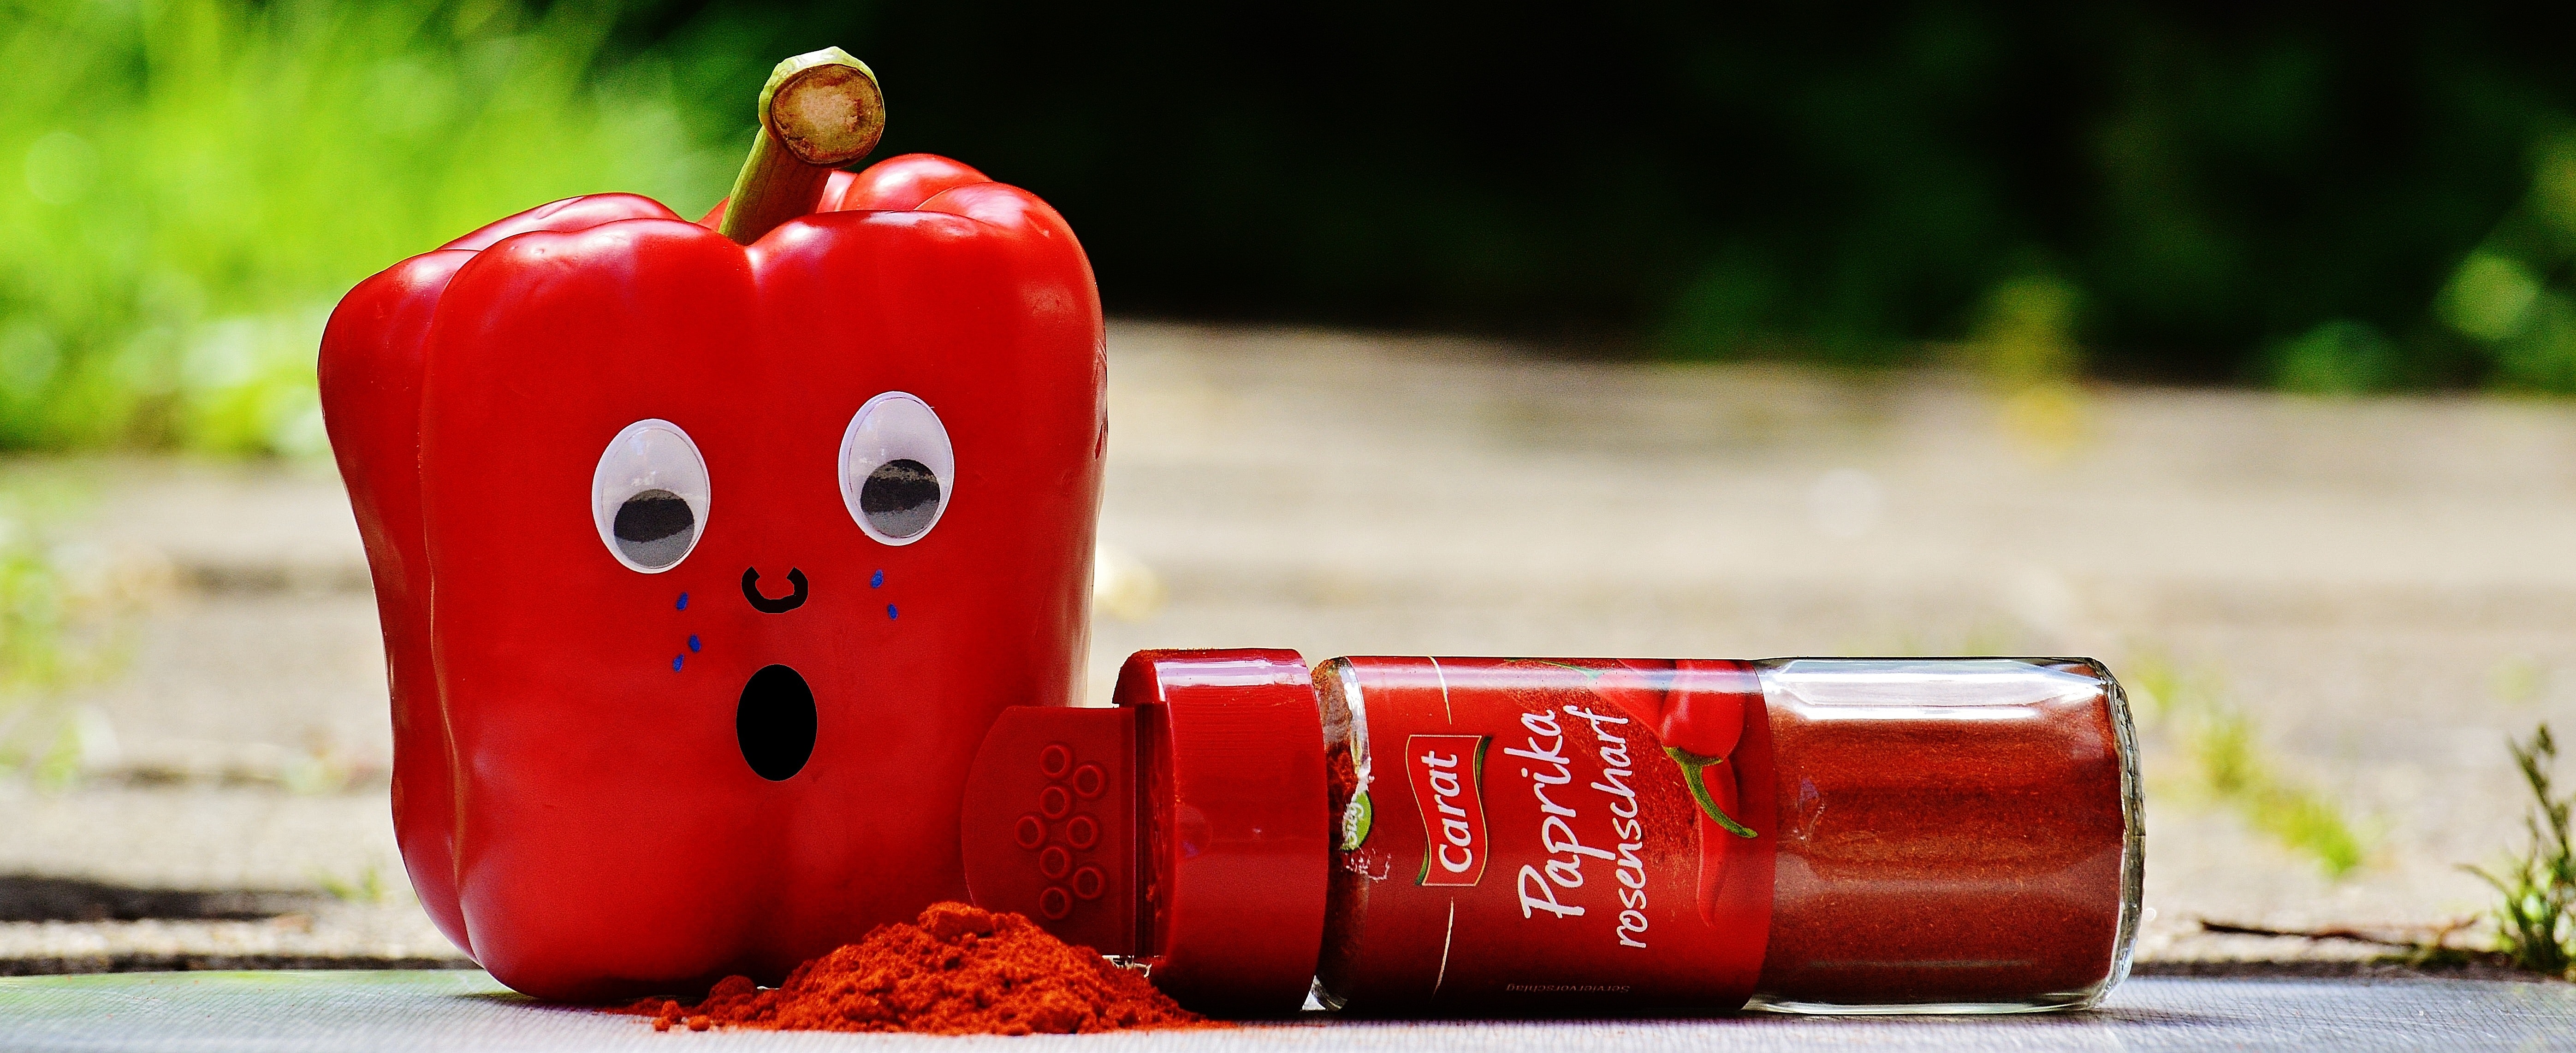 Red pepper beside red paprika plastic bottle photo